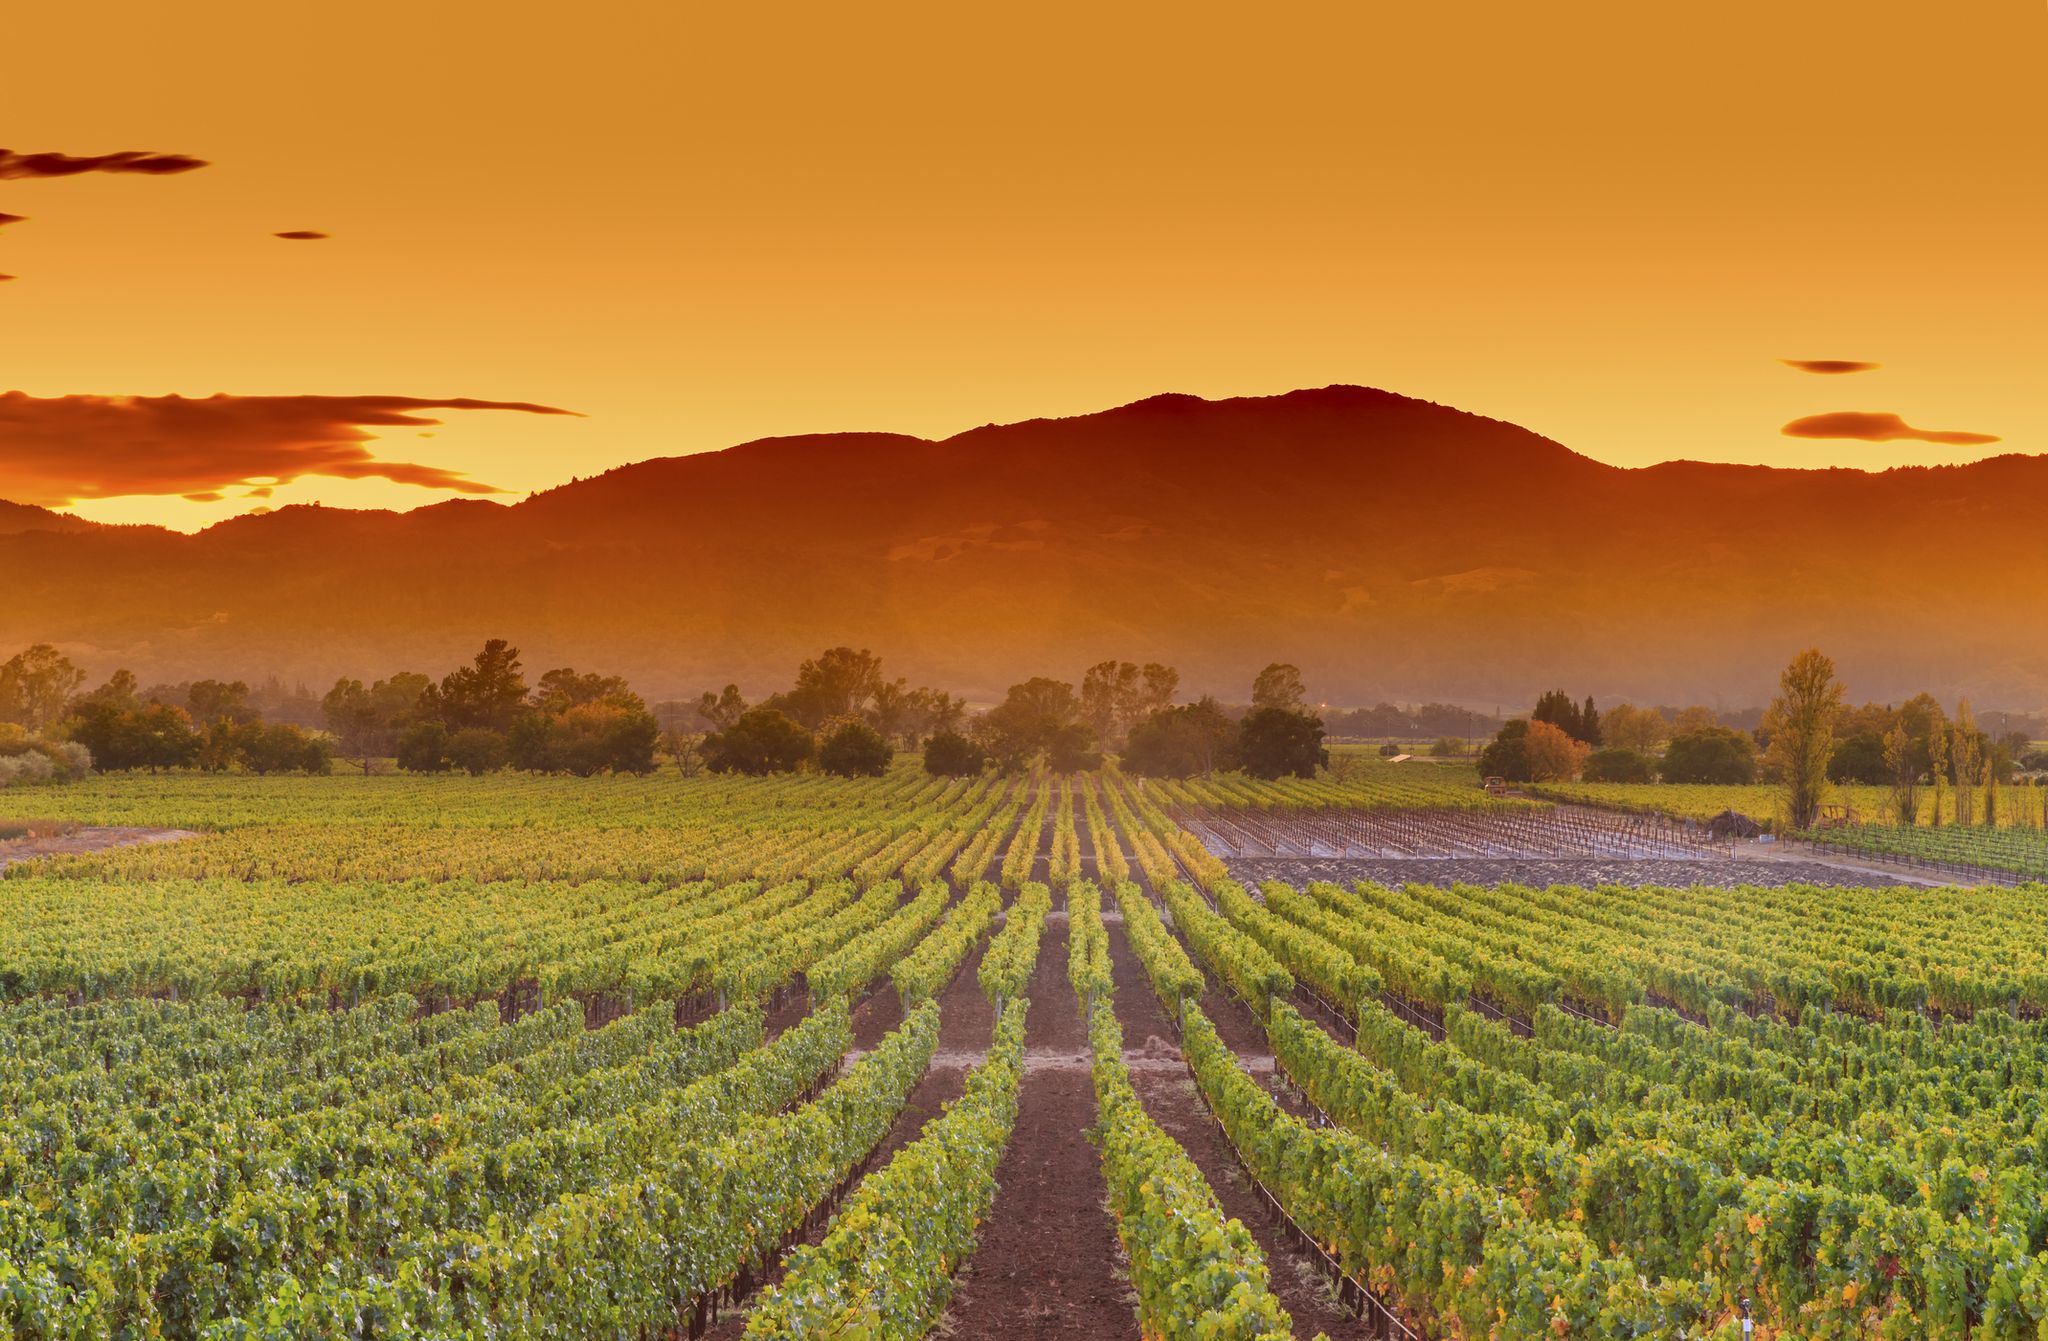 Napa Valley wine guide: the best vineyards to visit